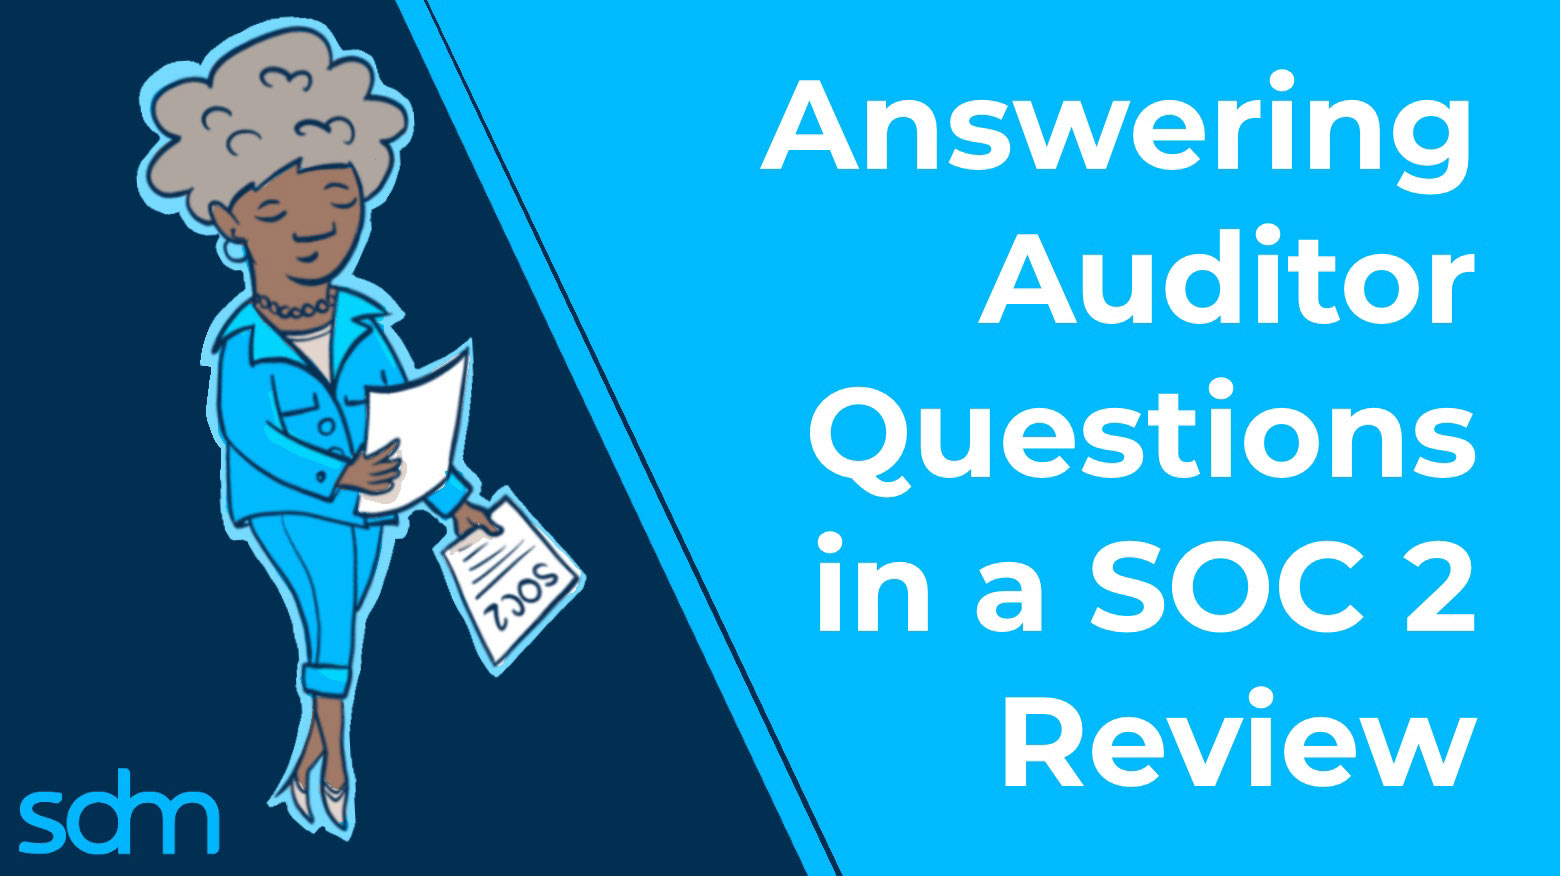 Answering Auditors’ Questions in a SOC 2 Review